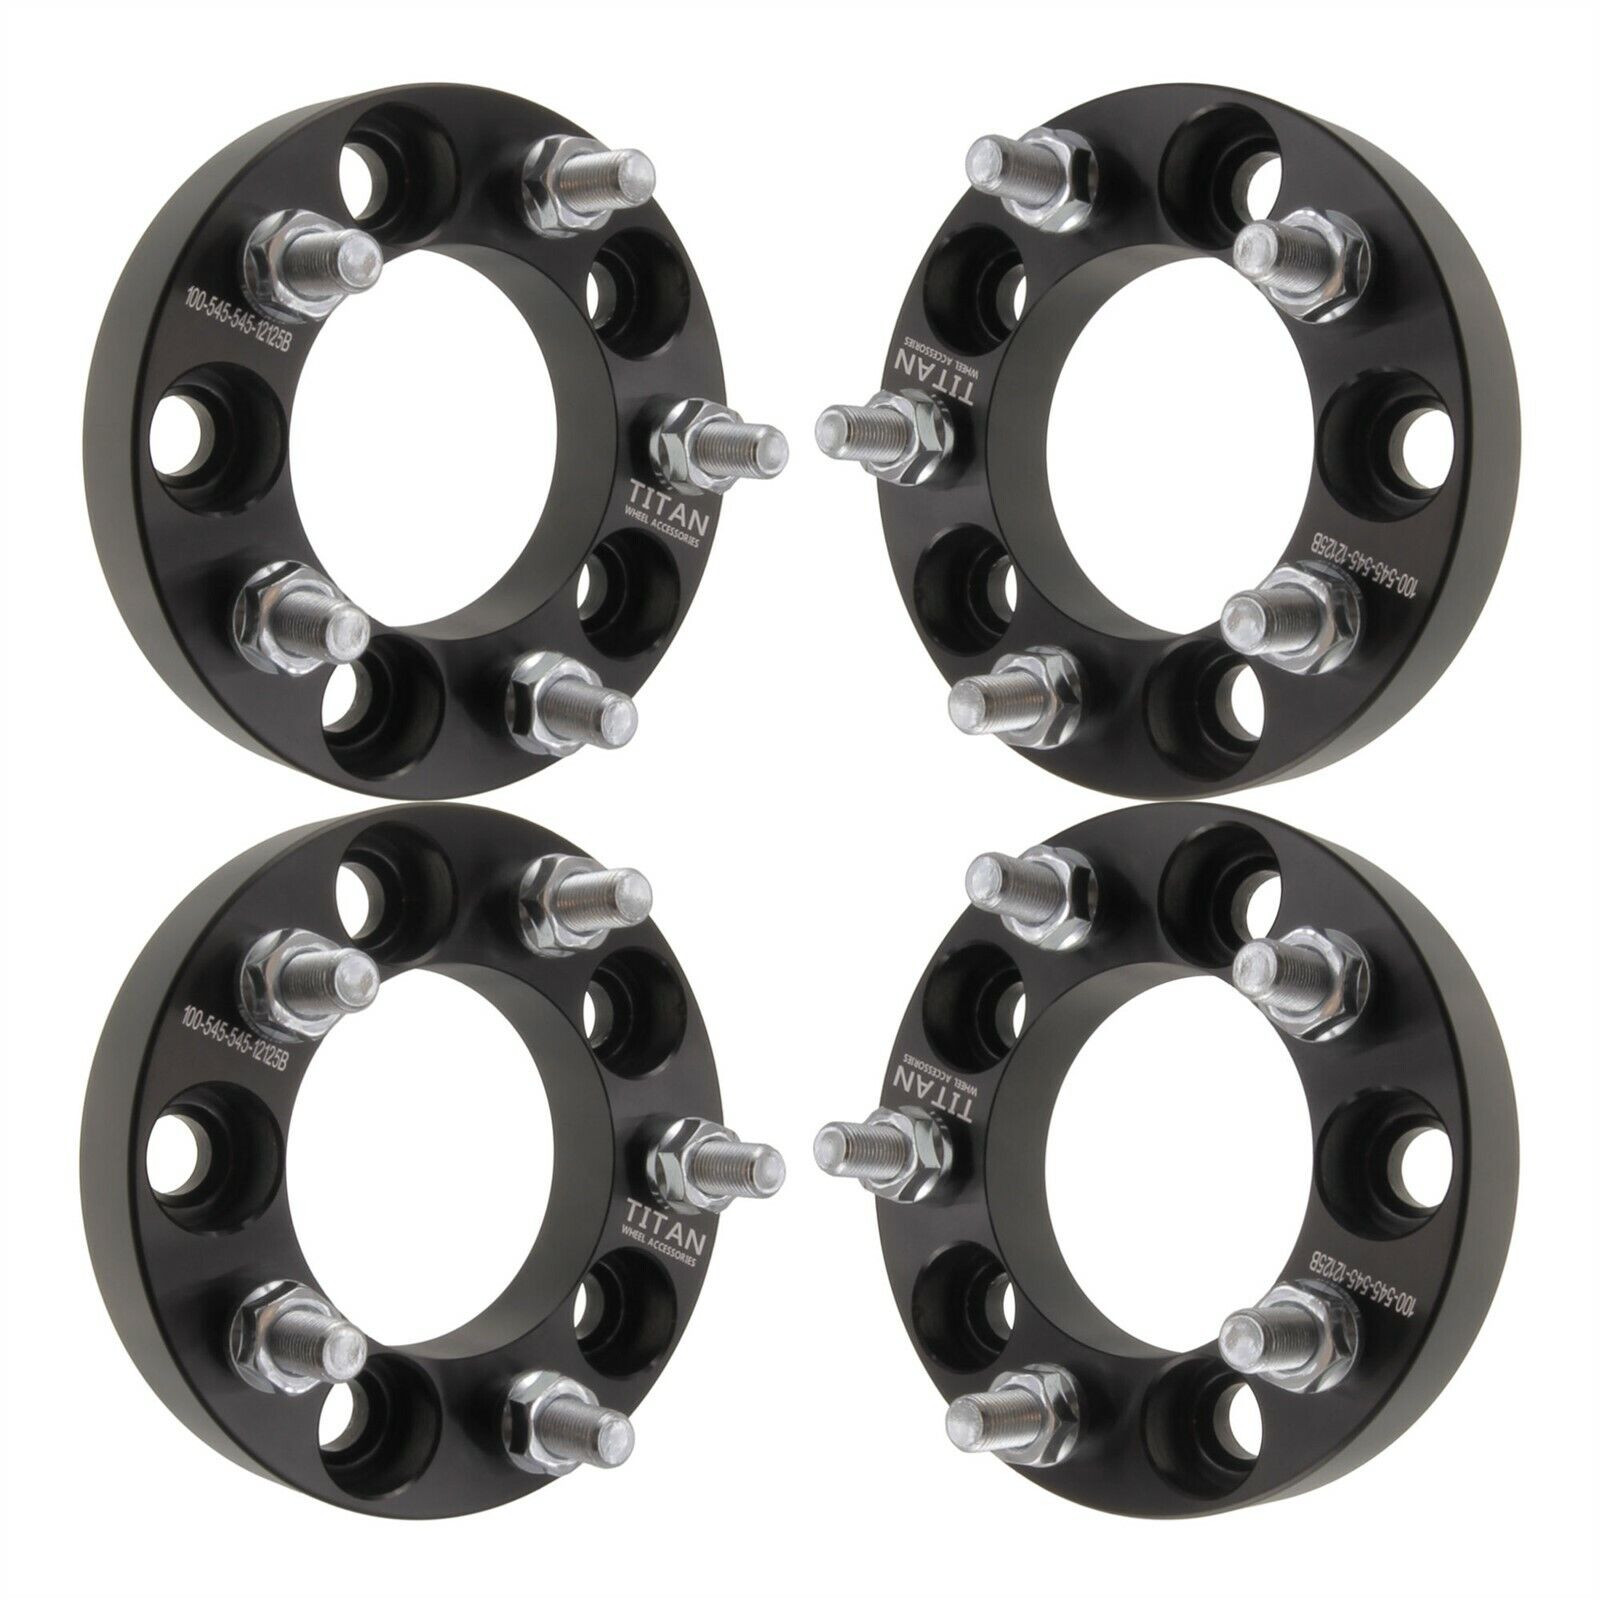 (4) 25mm Wheel Spacers 5x4.5 Fits Ford Mustang Classic Car Hotrod Boss Shelby 